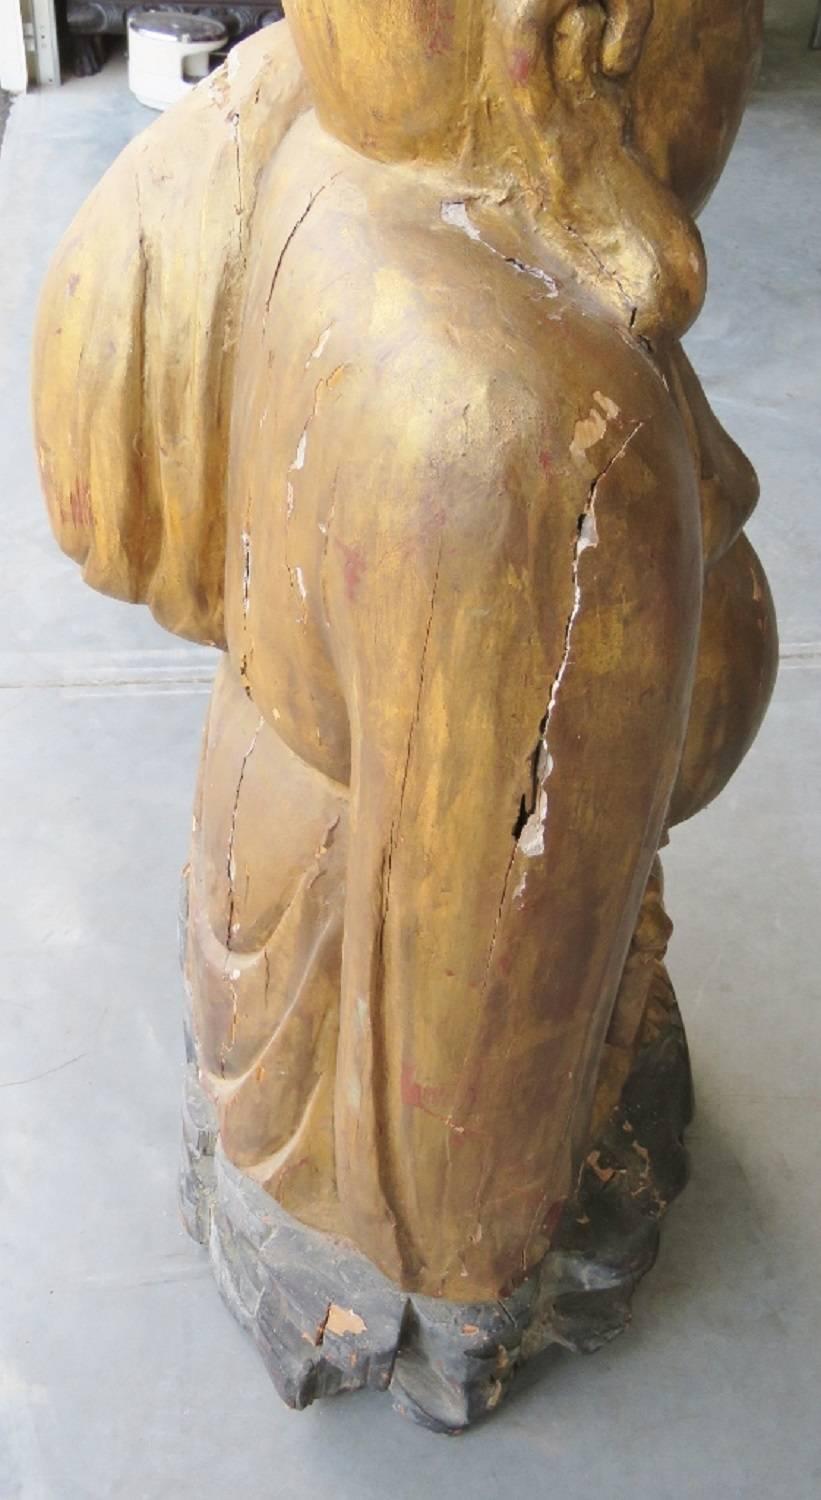 Hardwood 30 inch Tall Antique 1880s Era Carved and Painted Ancient Looking Wood Buddha